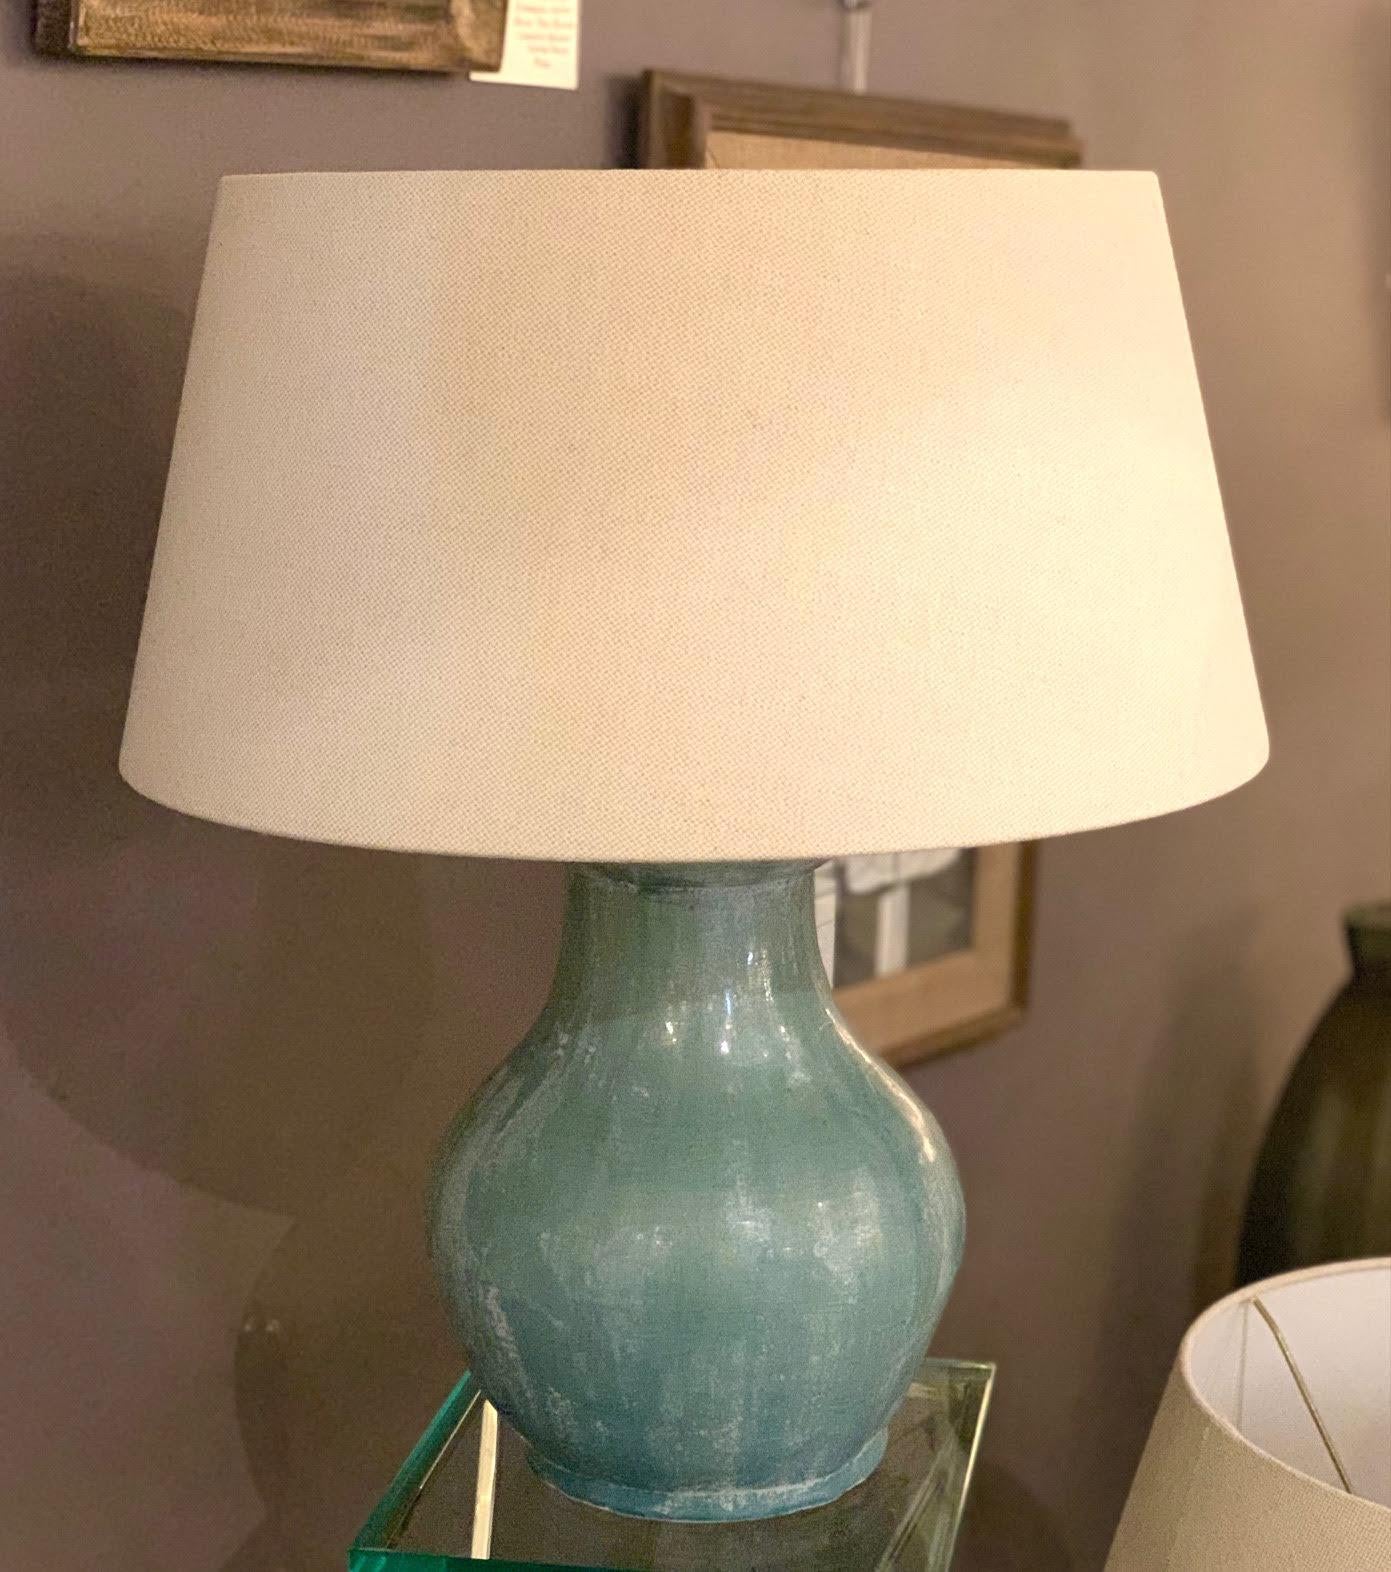 Contemporary Chinese pair of weathered light turquoise colored glazed lamps.
Base measures 9D x 11H
Belgian linen shades
Shade diamter 17.5